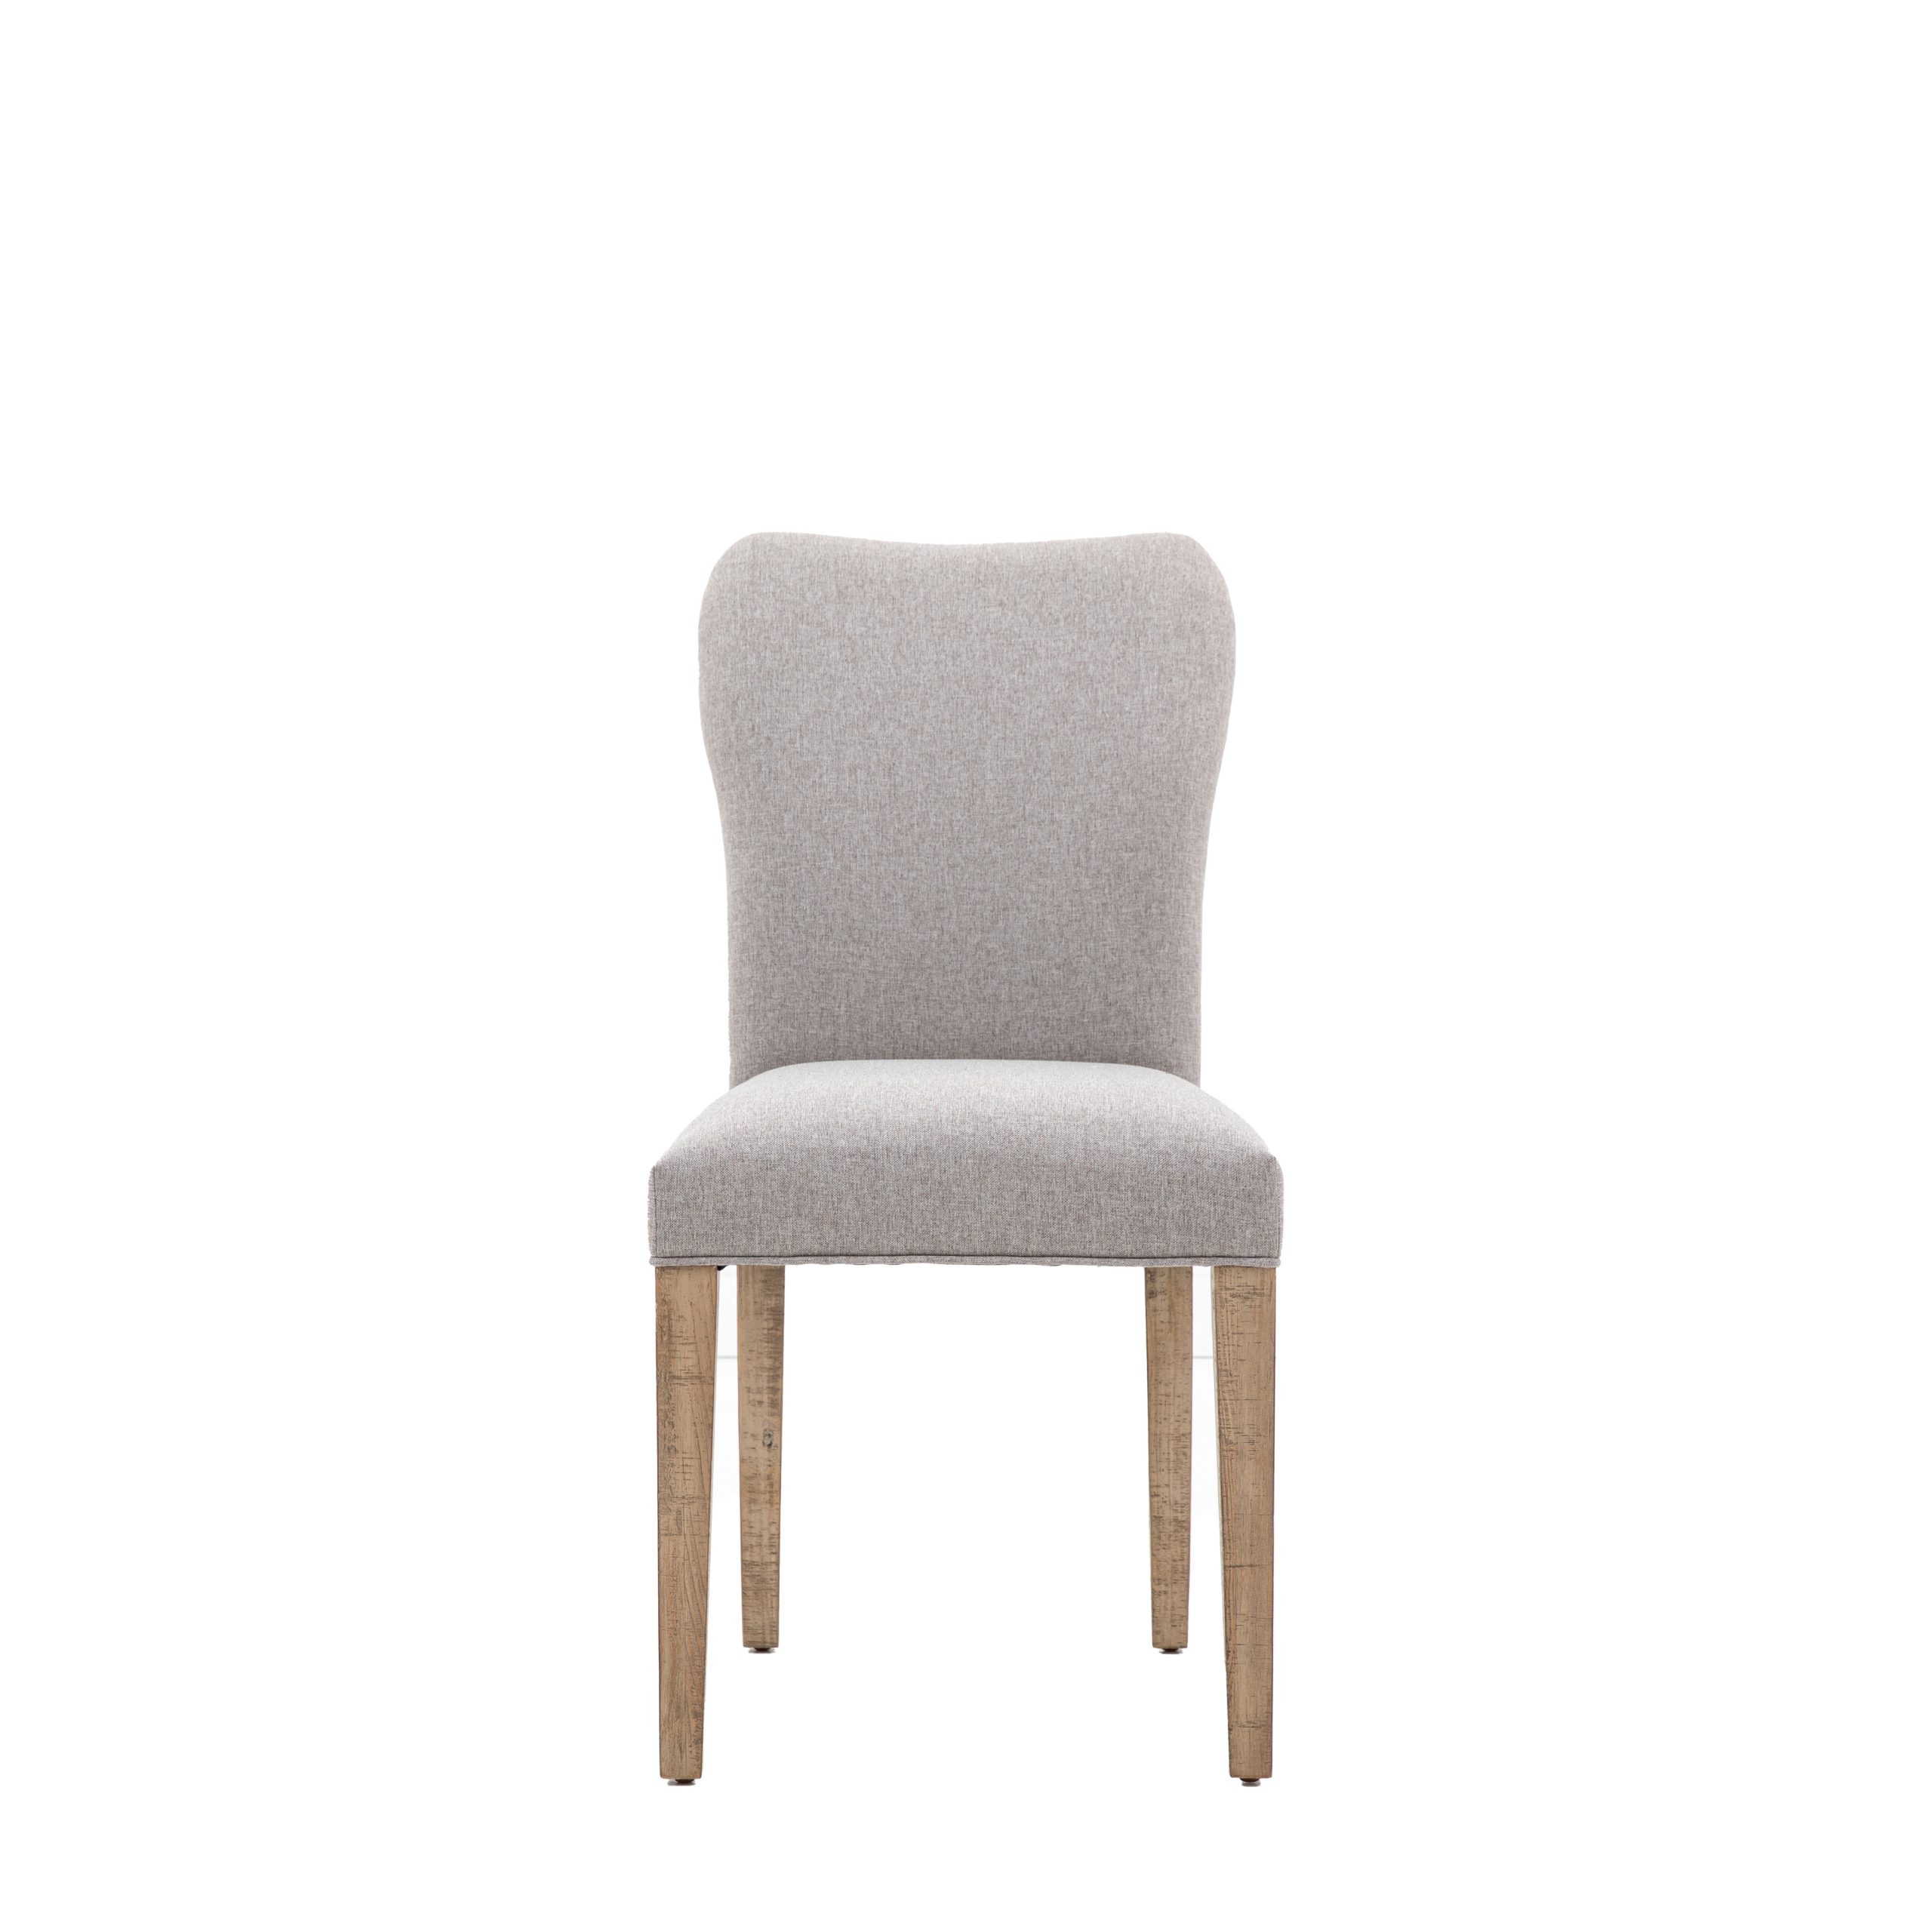 Gallery Direct Vancouver Dining Chair (Set of 2)